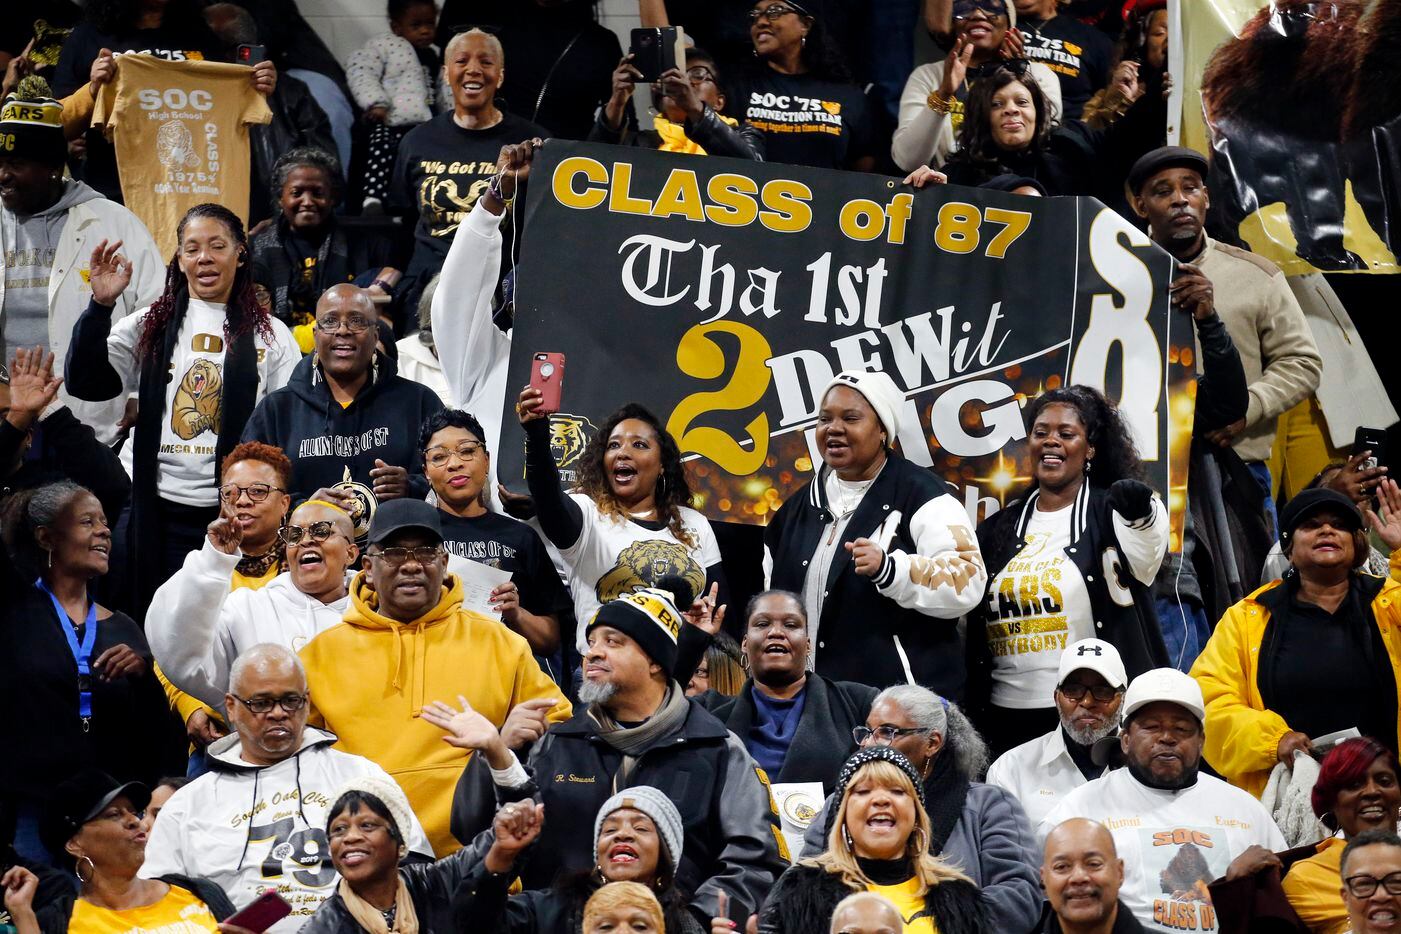 The 1980's alumni of South Oak Cliff High School showed their spirit during a ceremonial...